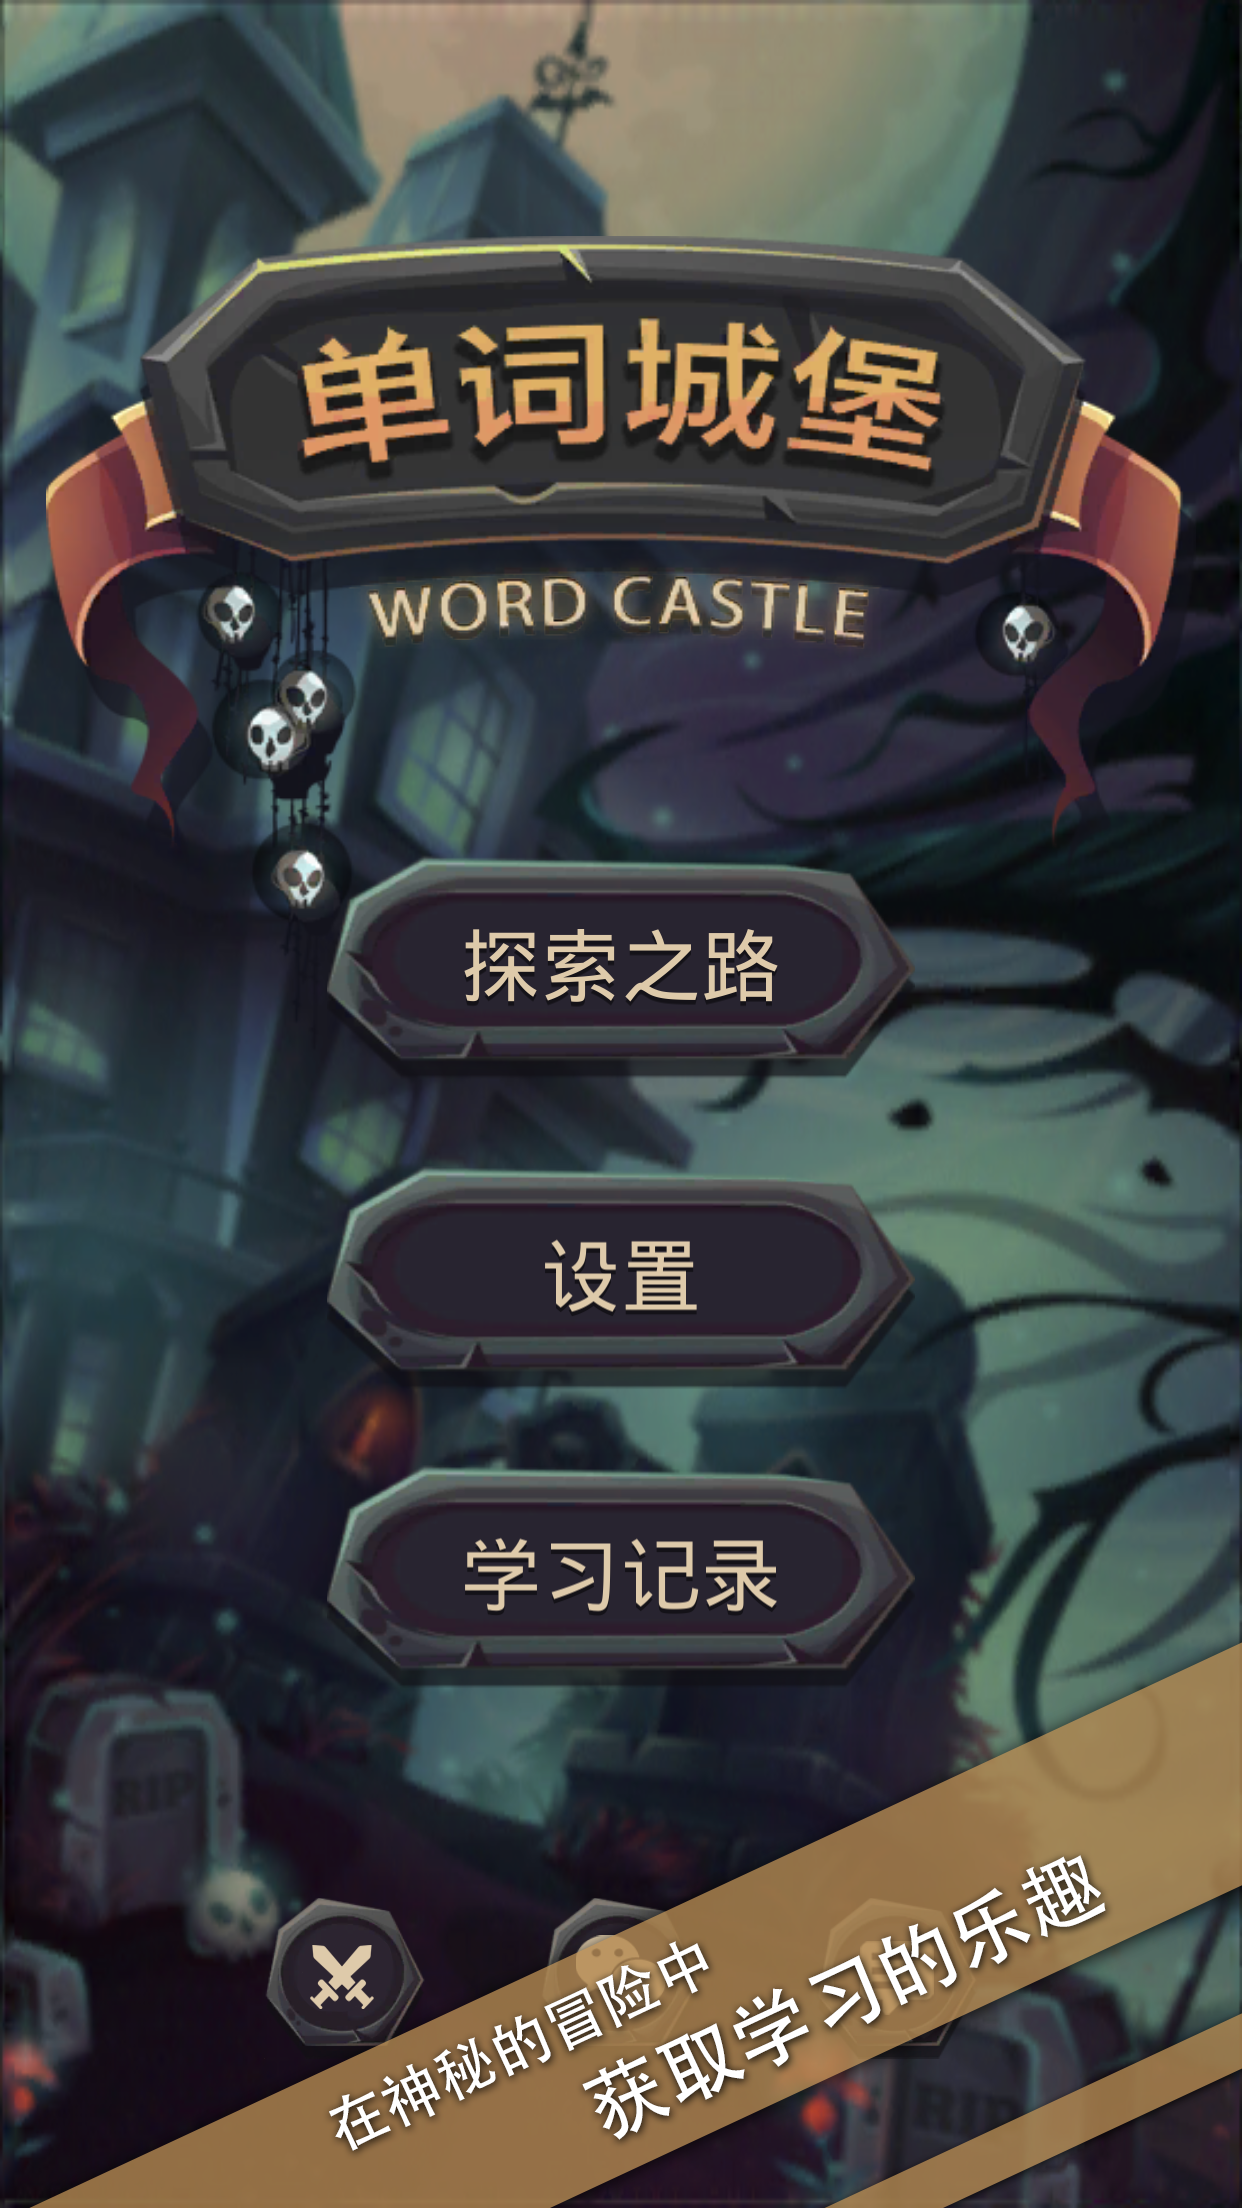 Screenshot 1 of Word Castle (Thử nghiệm) 1.1.1